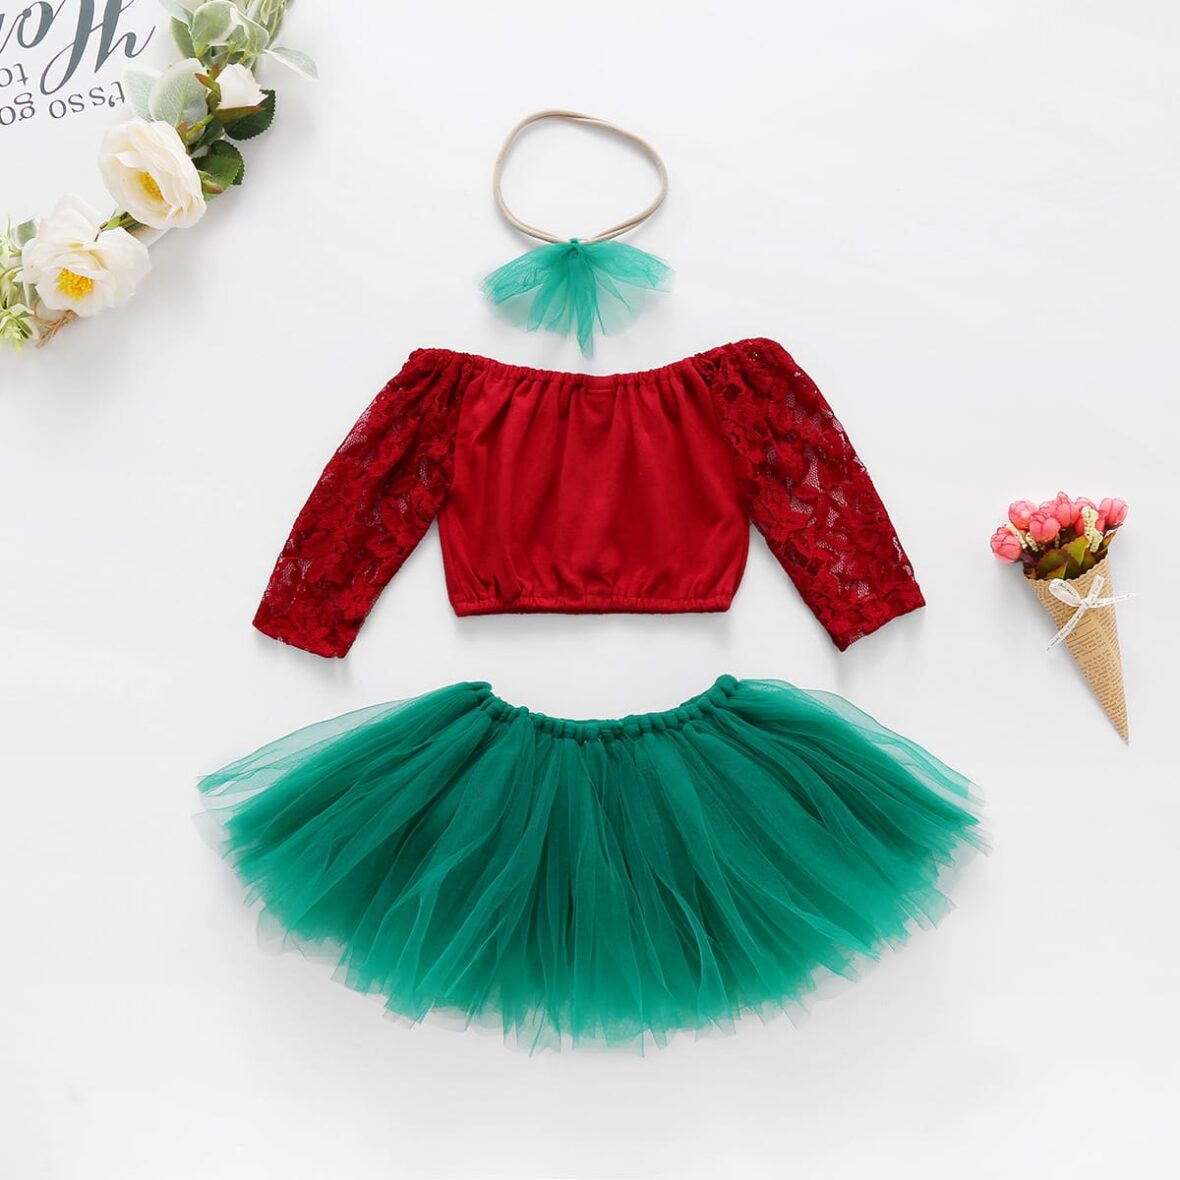 Red Top And Green Tutu For Baby Girl Available On Awoof Special Sales